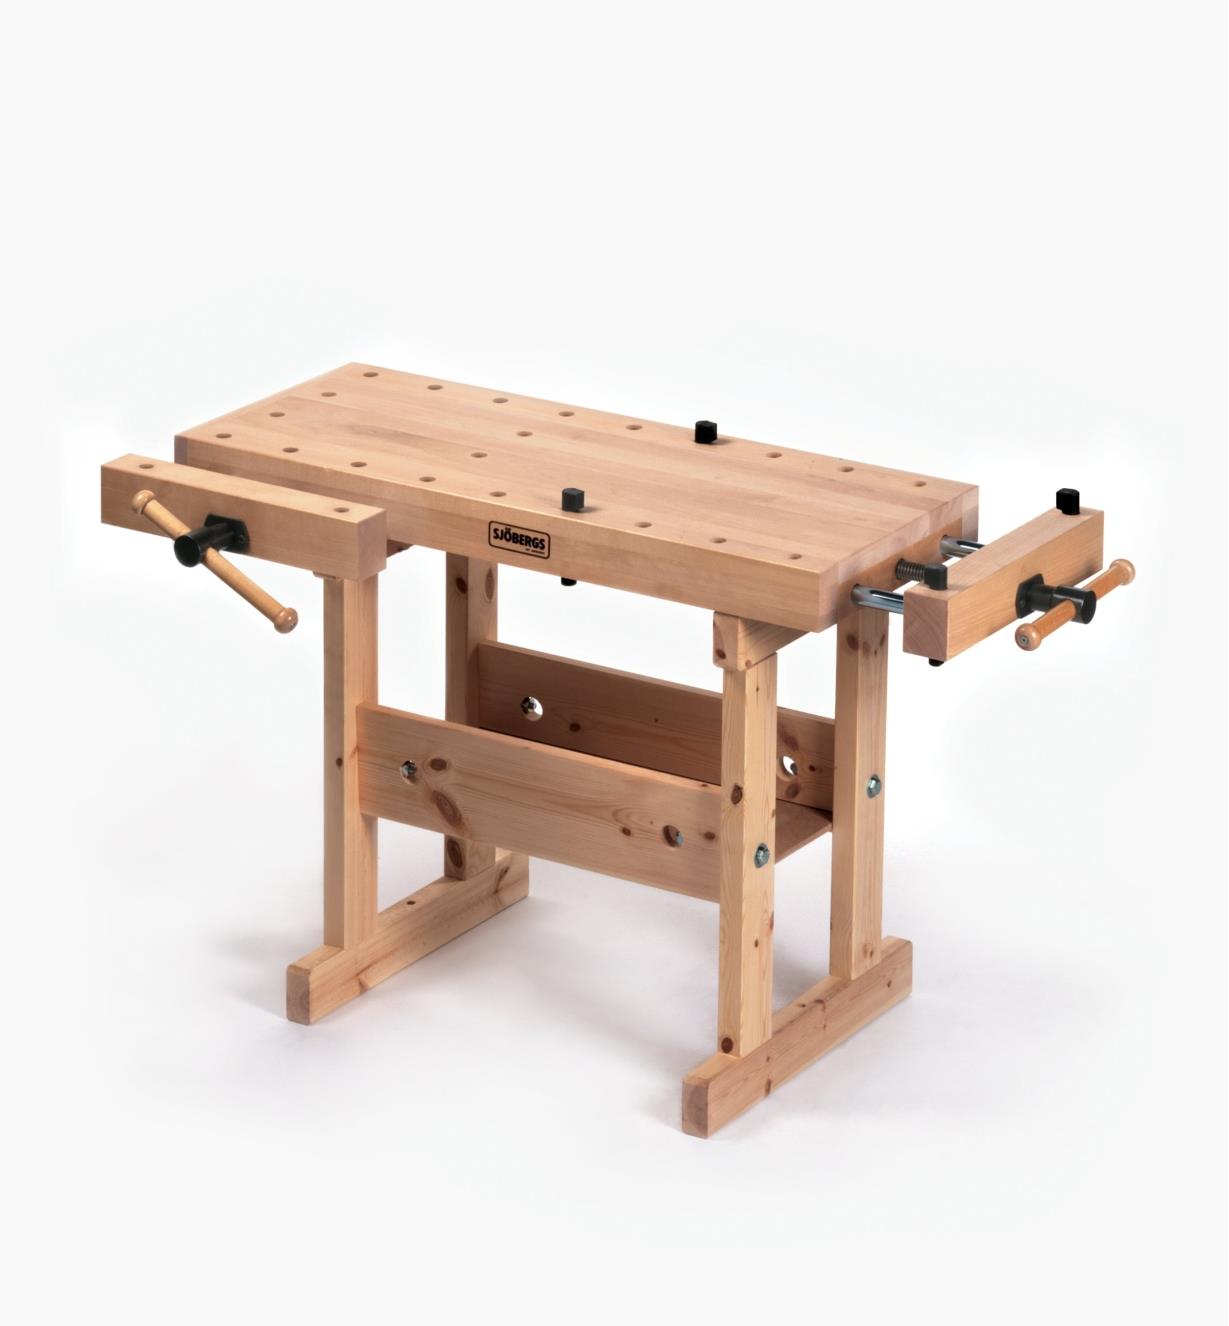 Sj bergs Compact Workbench - Lee Valley Tools